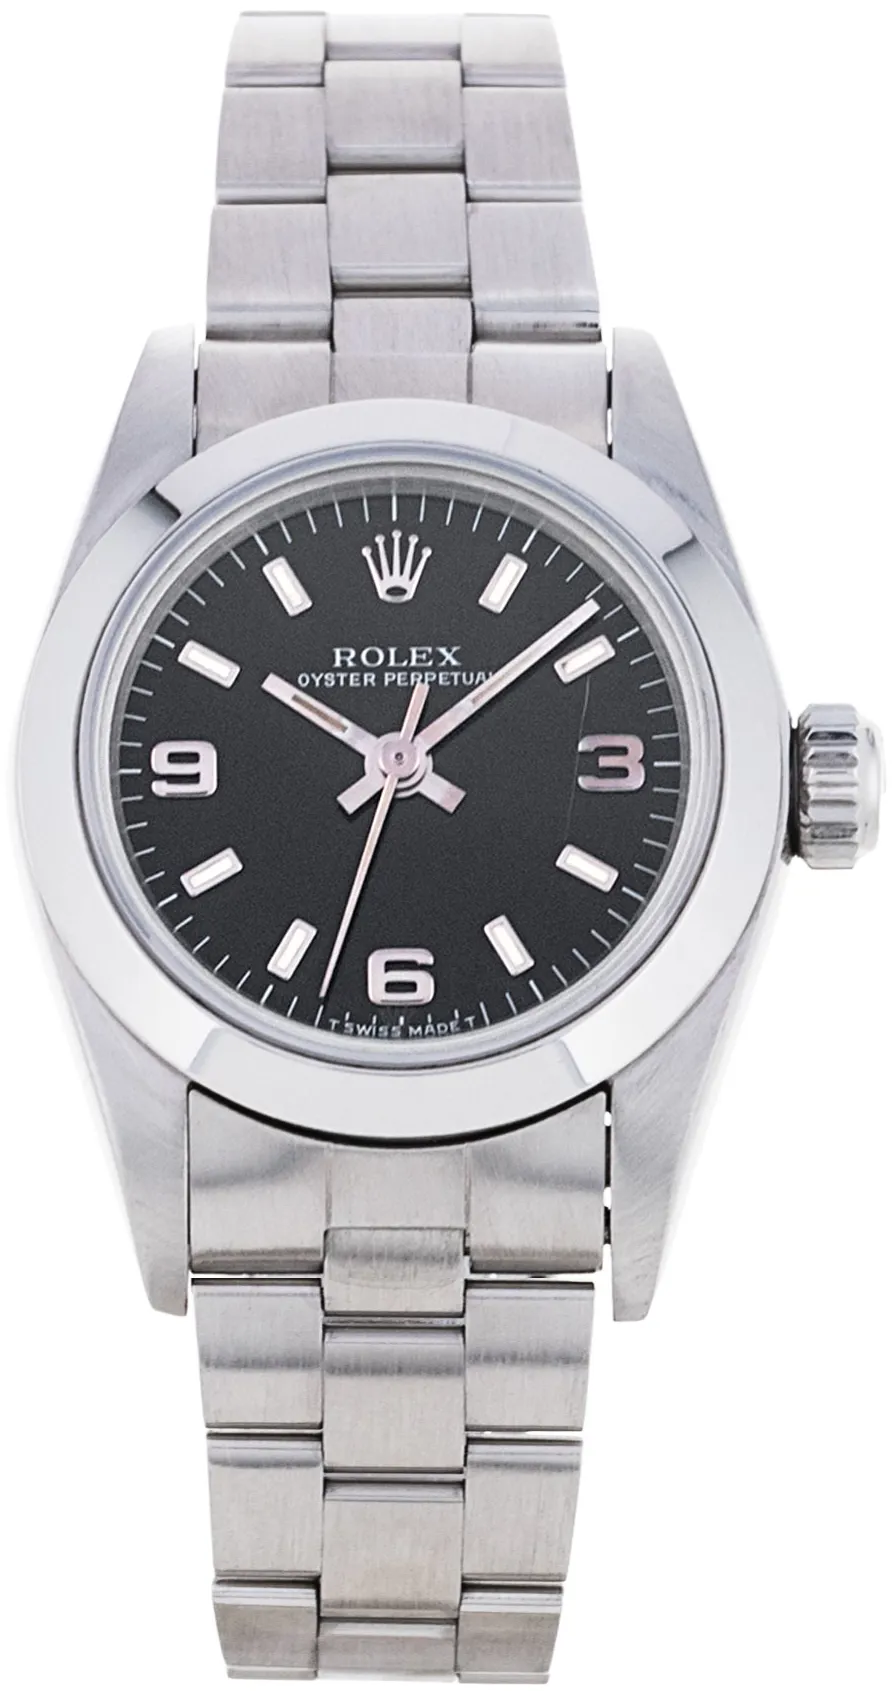 Rolex Oyster Perpetual 67180 24mm Stainless steel